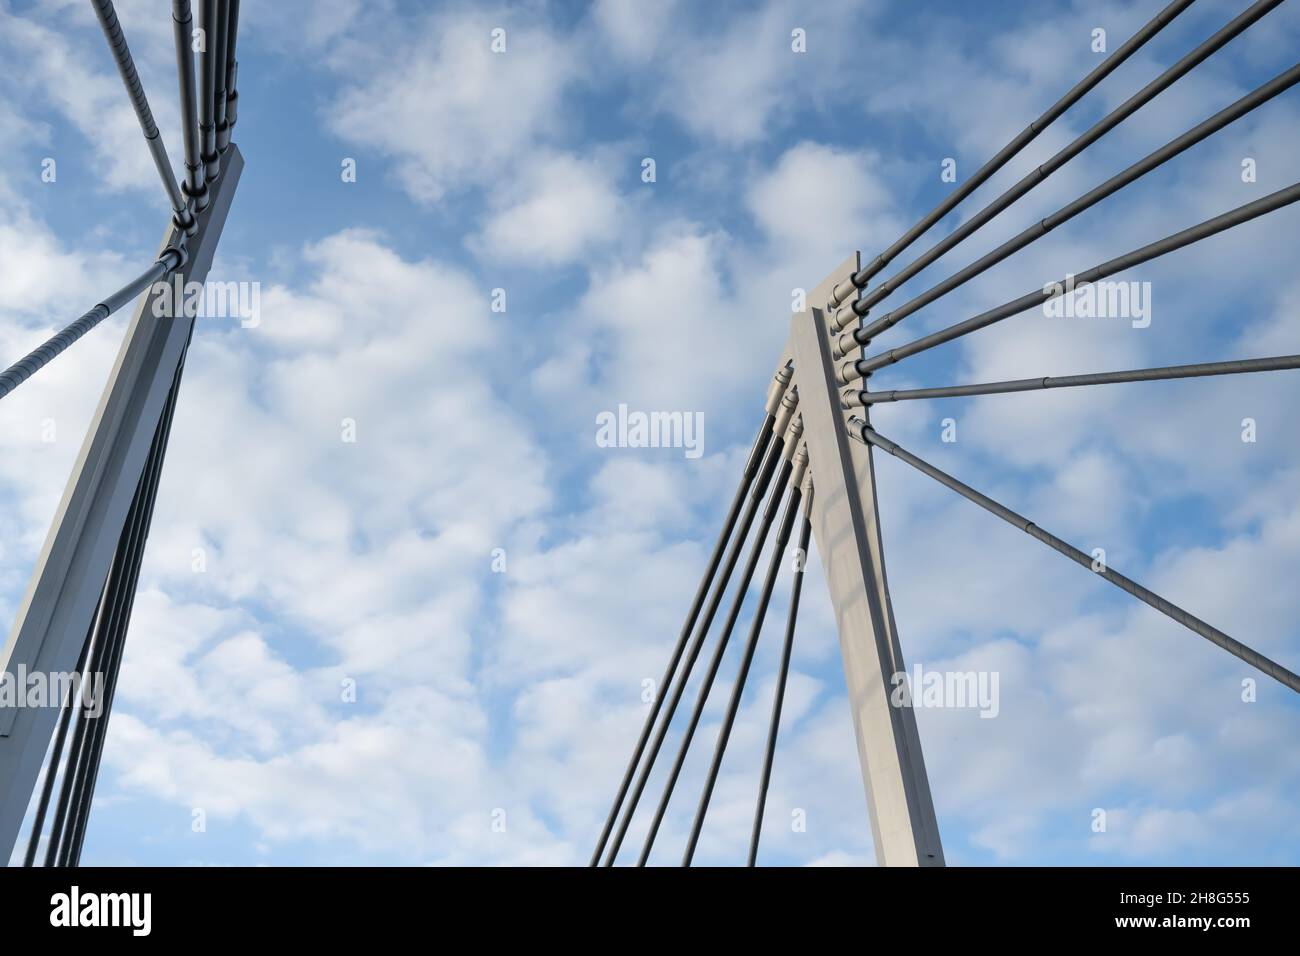 Abstract detail of the 'Kampmann bridge' in the city of Essen which connects the two districts Heisingen and Kupferdreh. Stock Photo